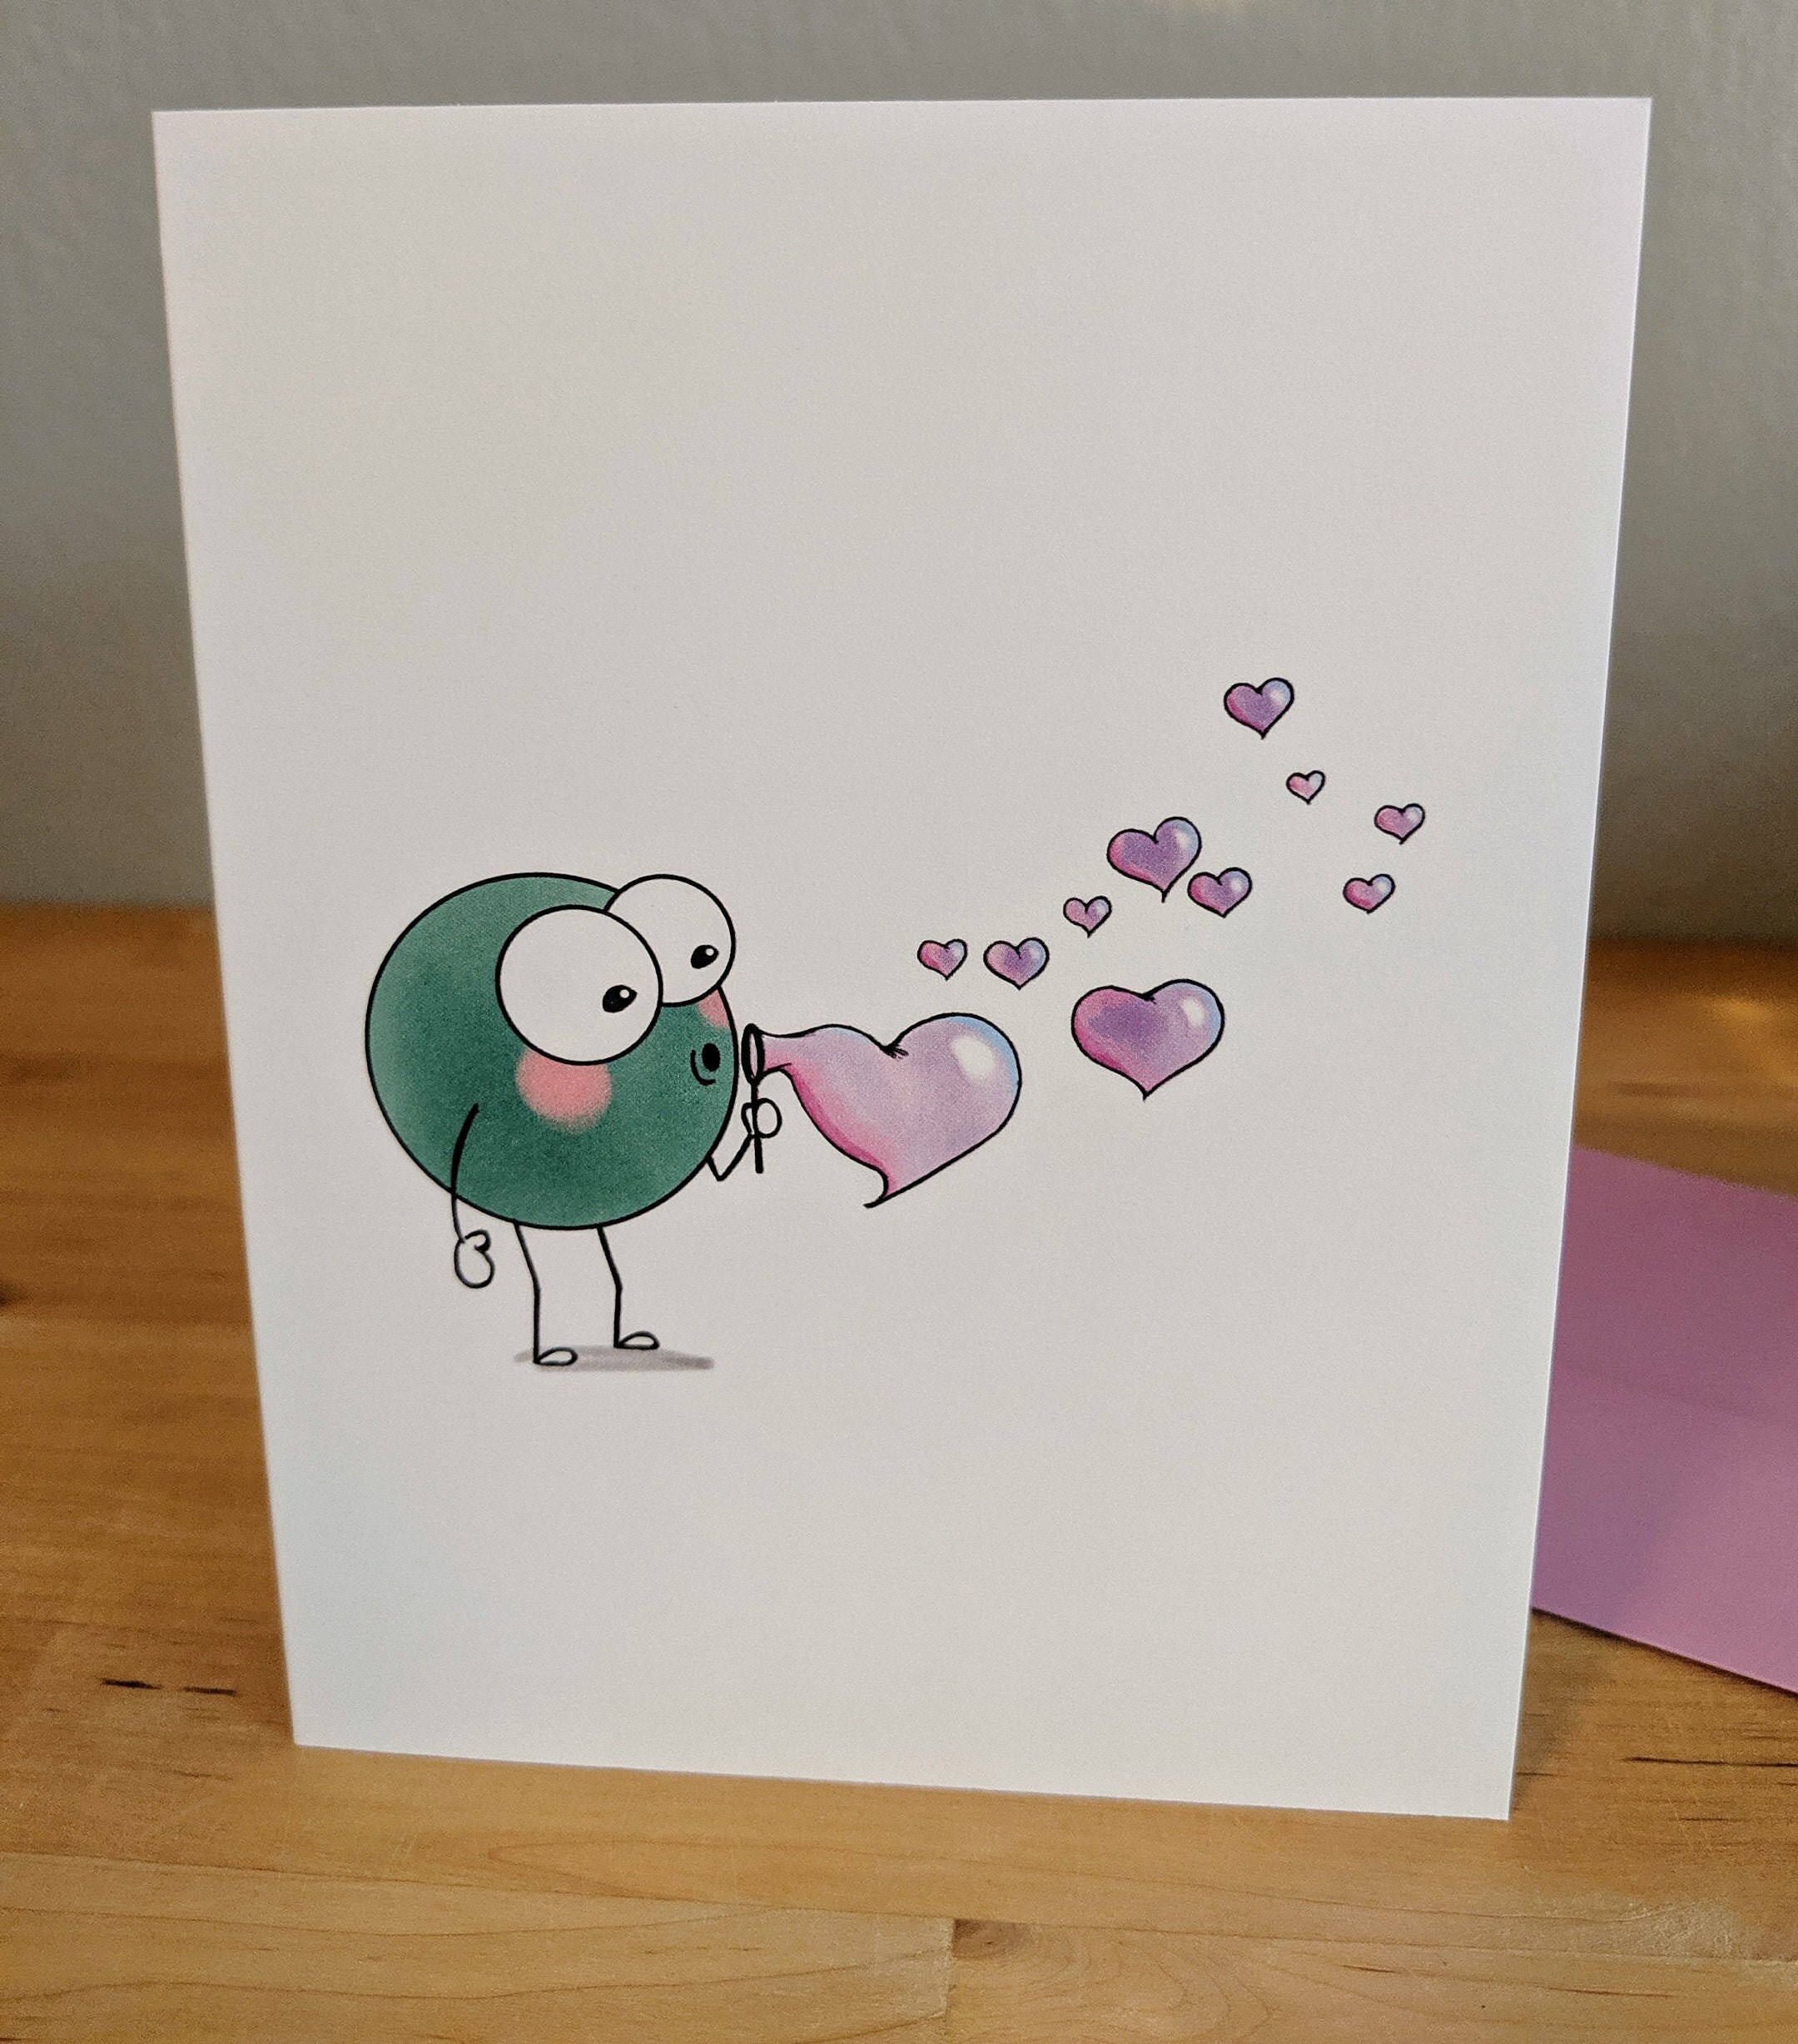 Romantic CardI Love YouValentine Soul Bugs Wordless Greeting Card Note Card with Envelope